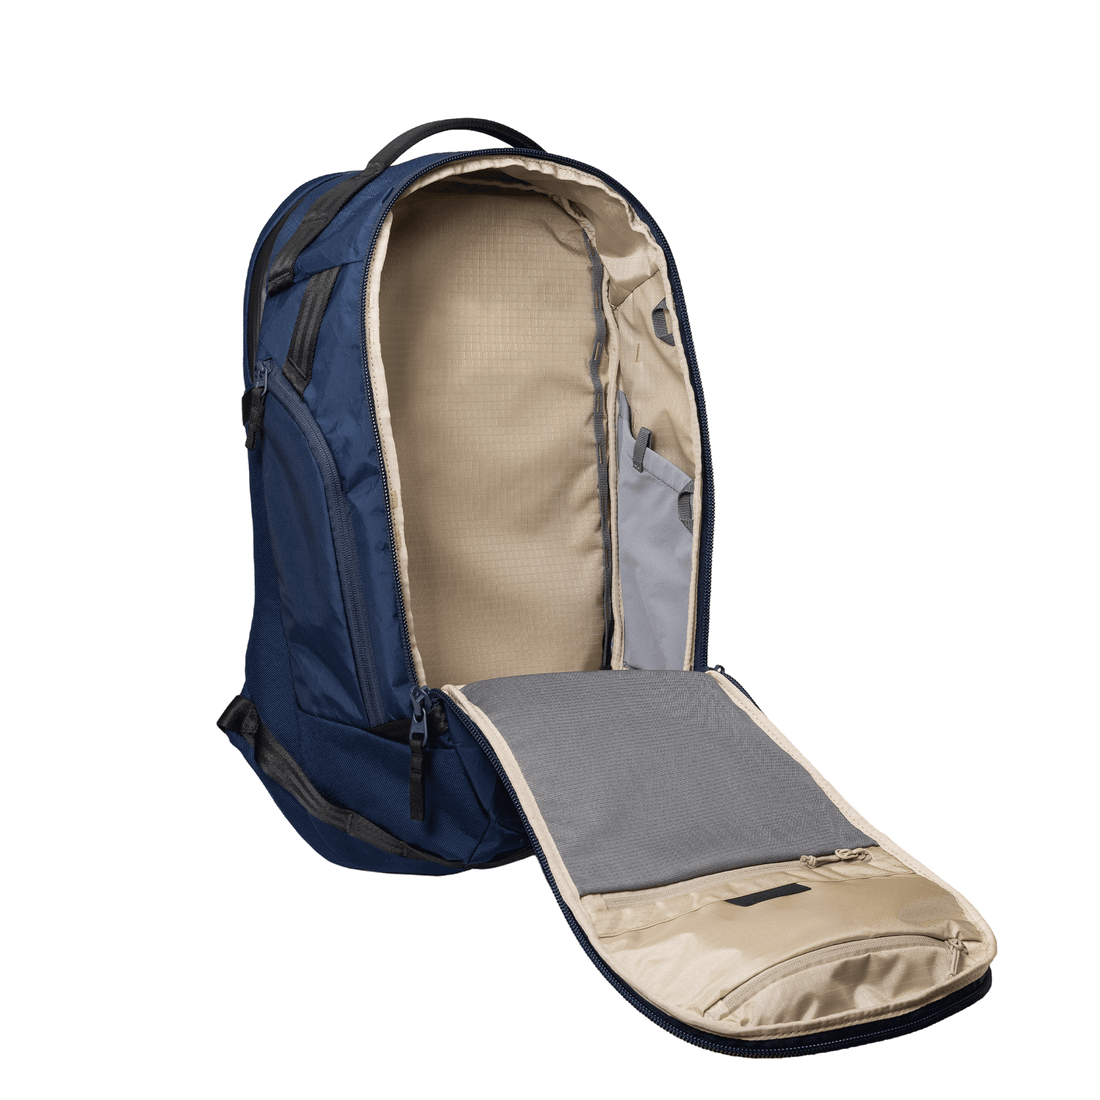 Max Backpack – Able Carry